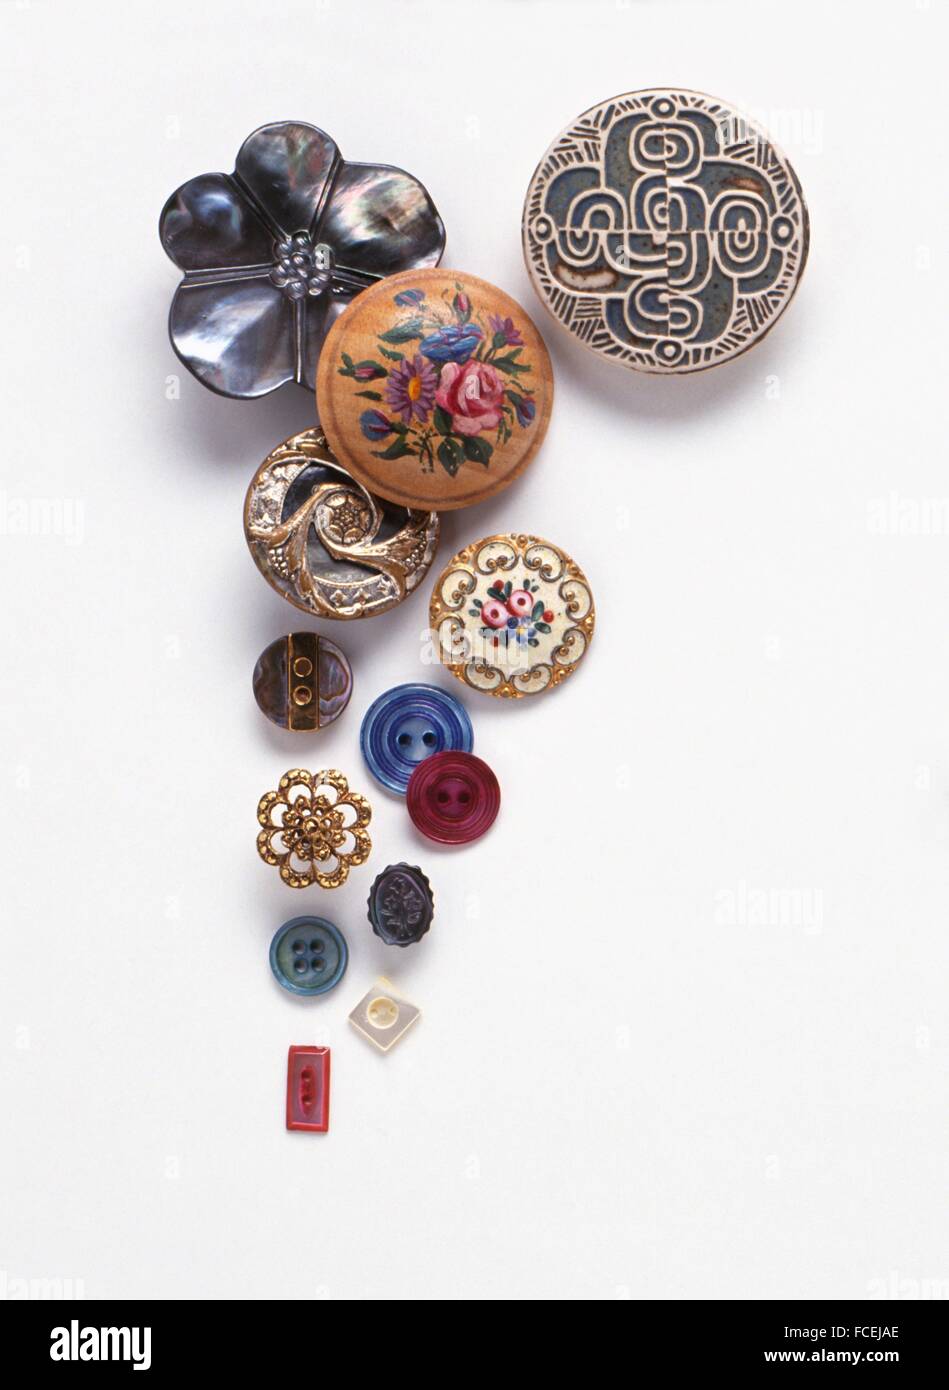 Decorative buttons of various shapes, colours and sizes Stock Photo